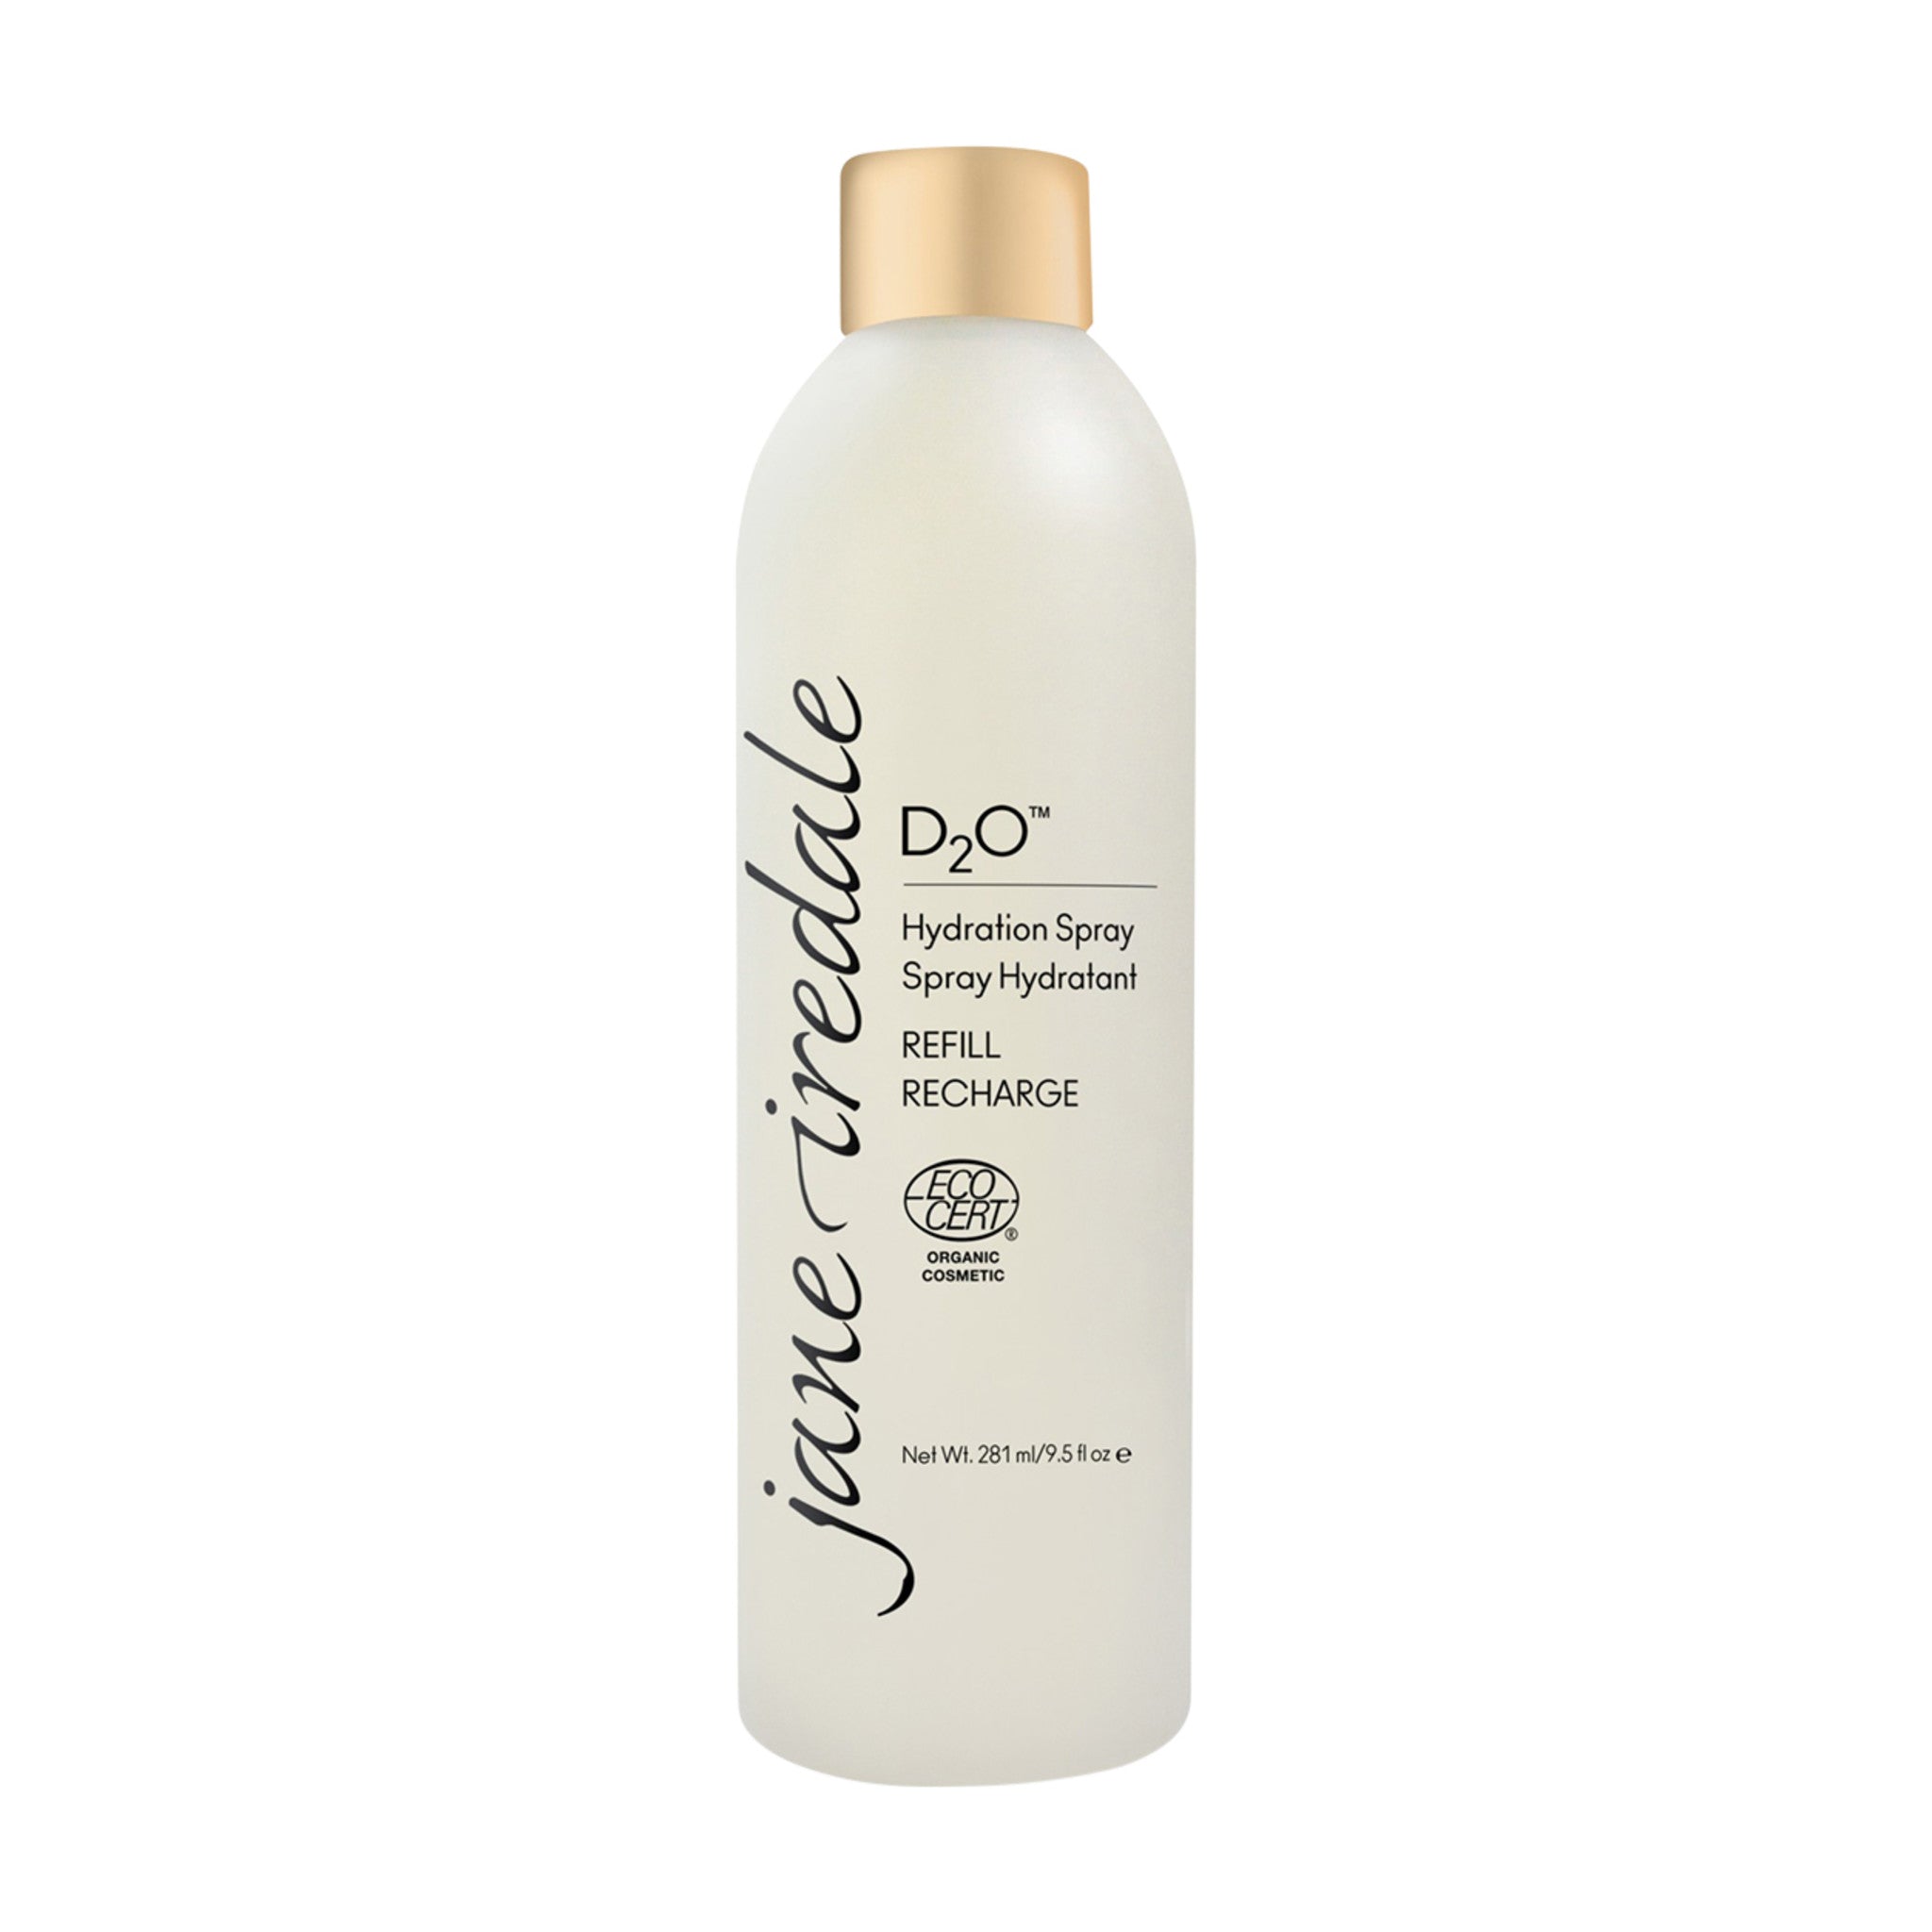 Jane Iredale D2O Hydration Spray Natural Refill main image.